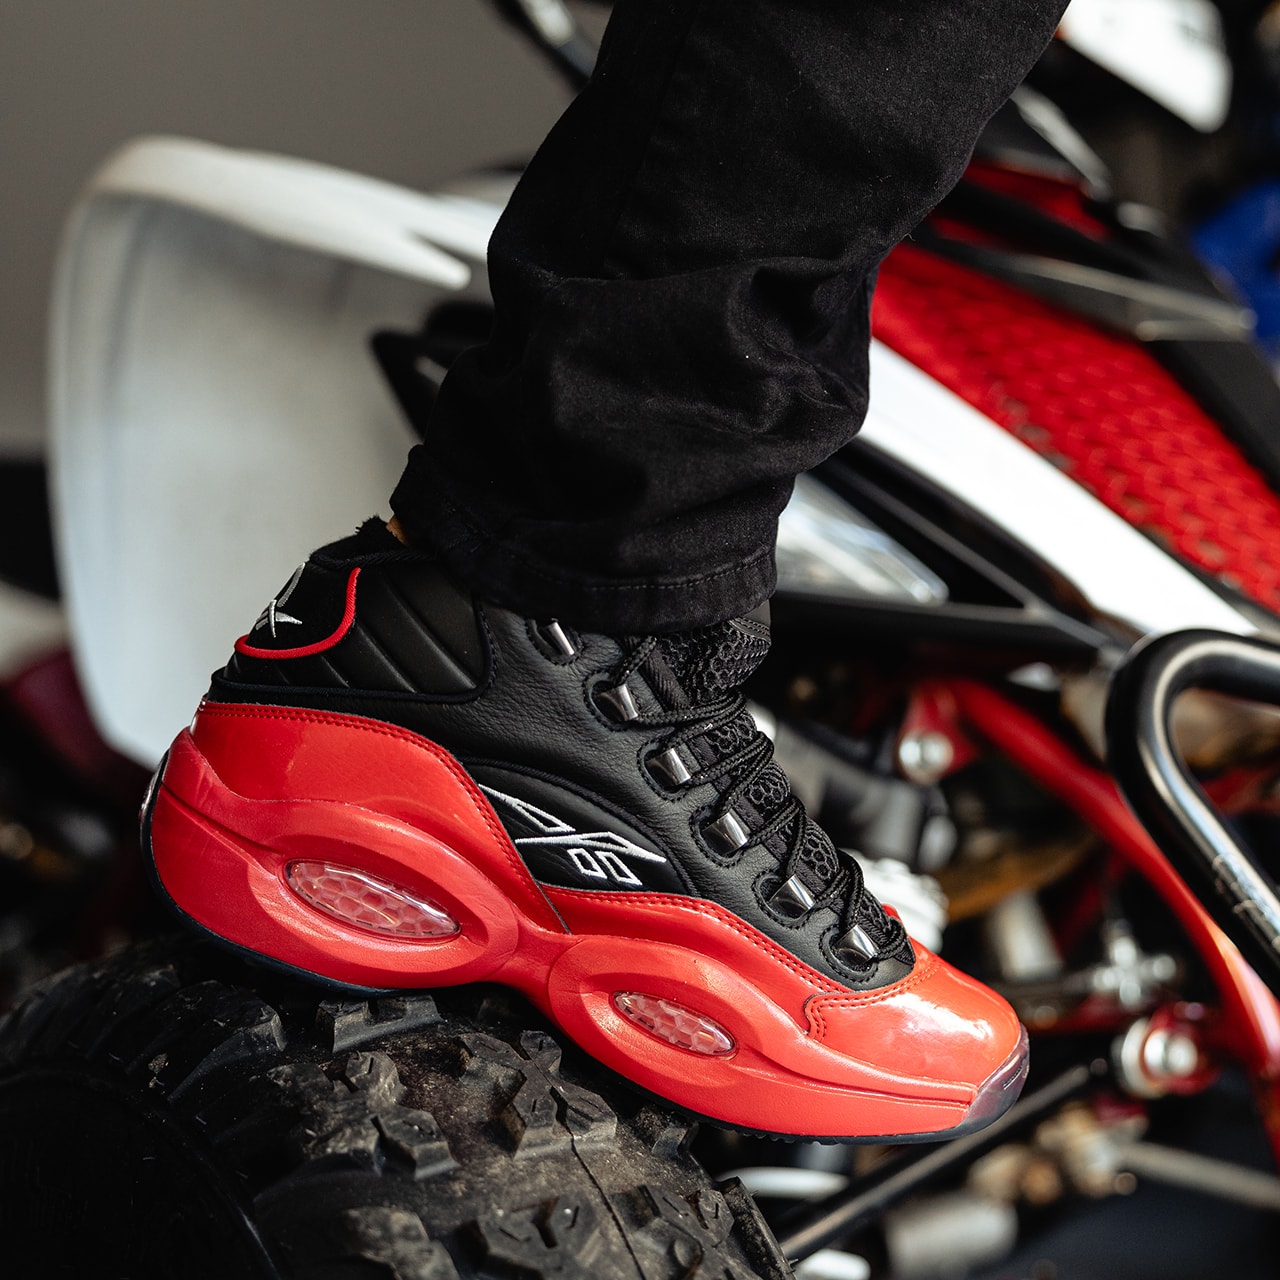 reebok question mid classic leather legacy street sleigh pack allen iverson i3 motosports release info date photos pricing buying guide 